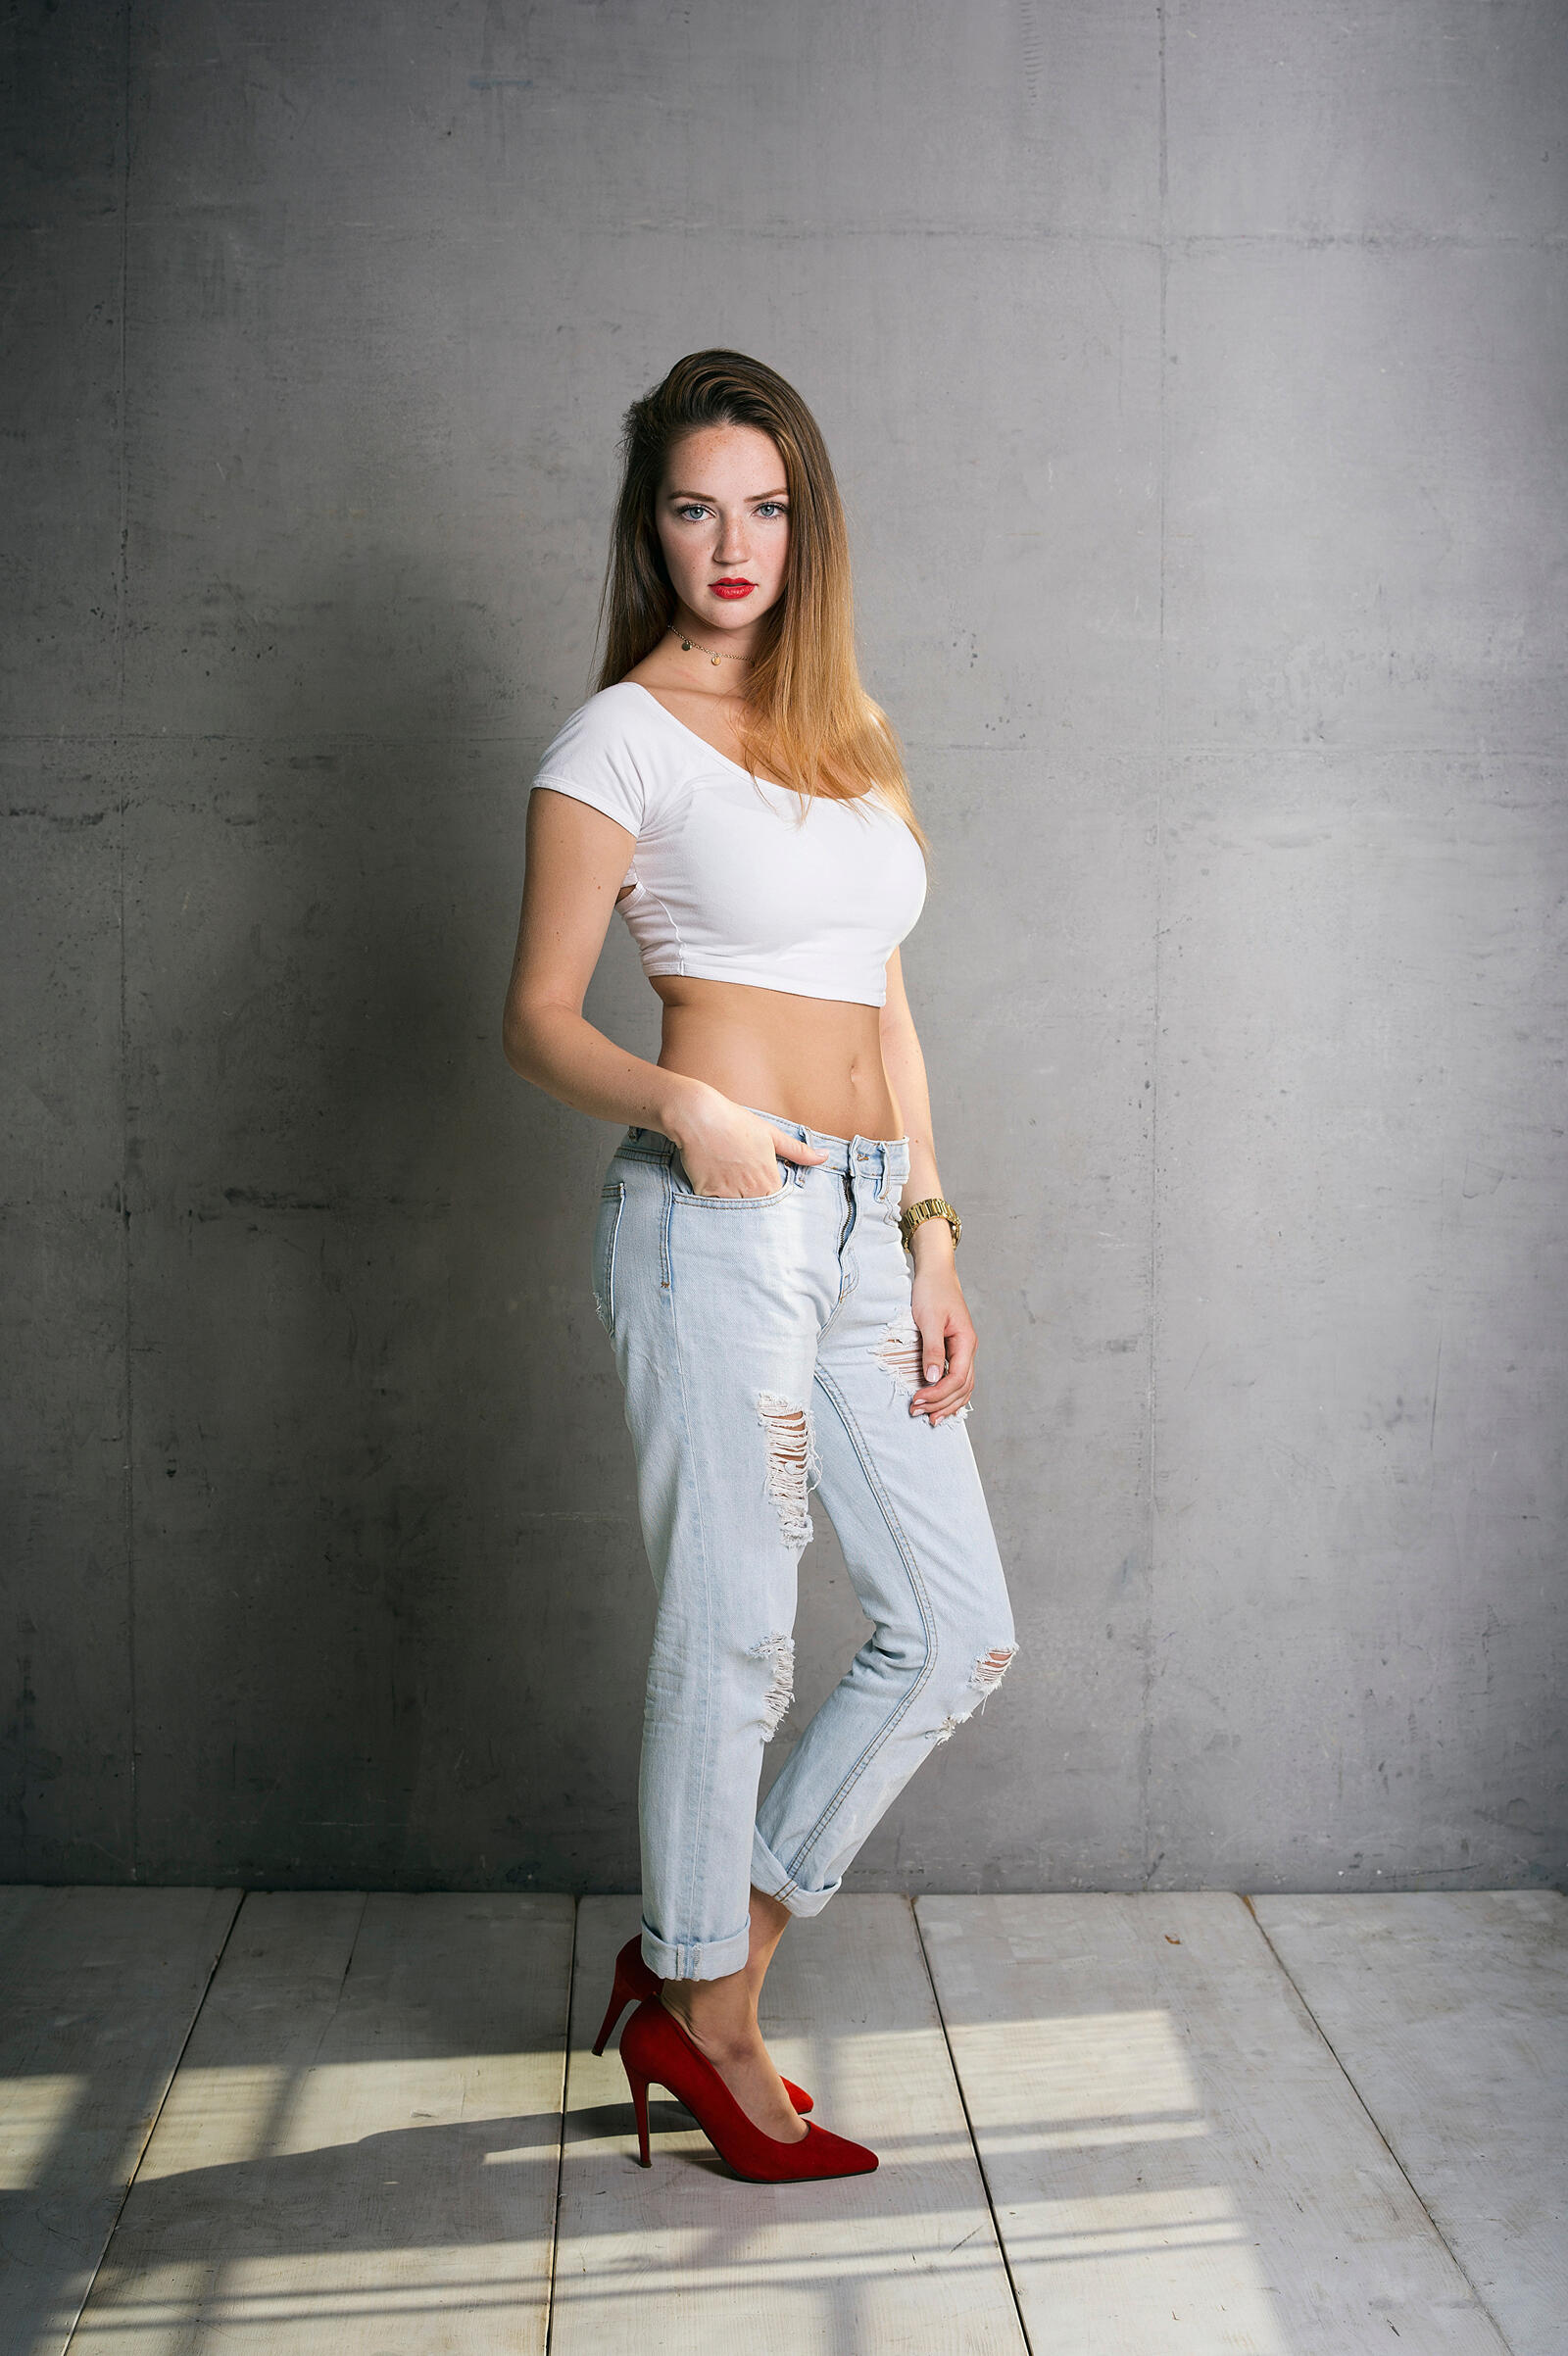 Wallpapers young woman posing jeans on the desktop